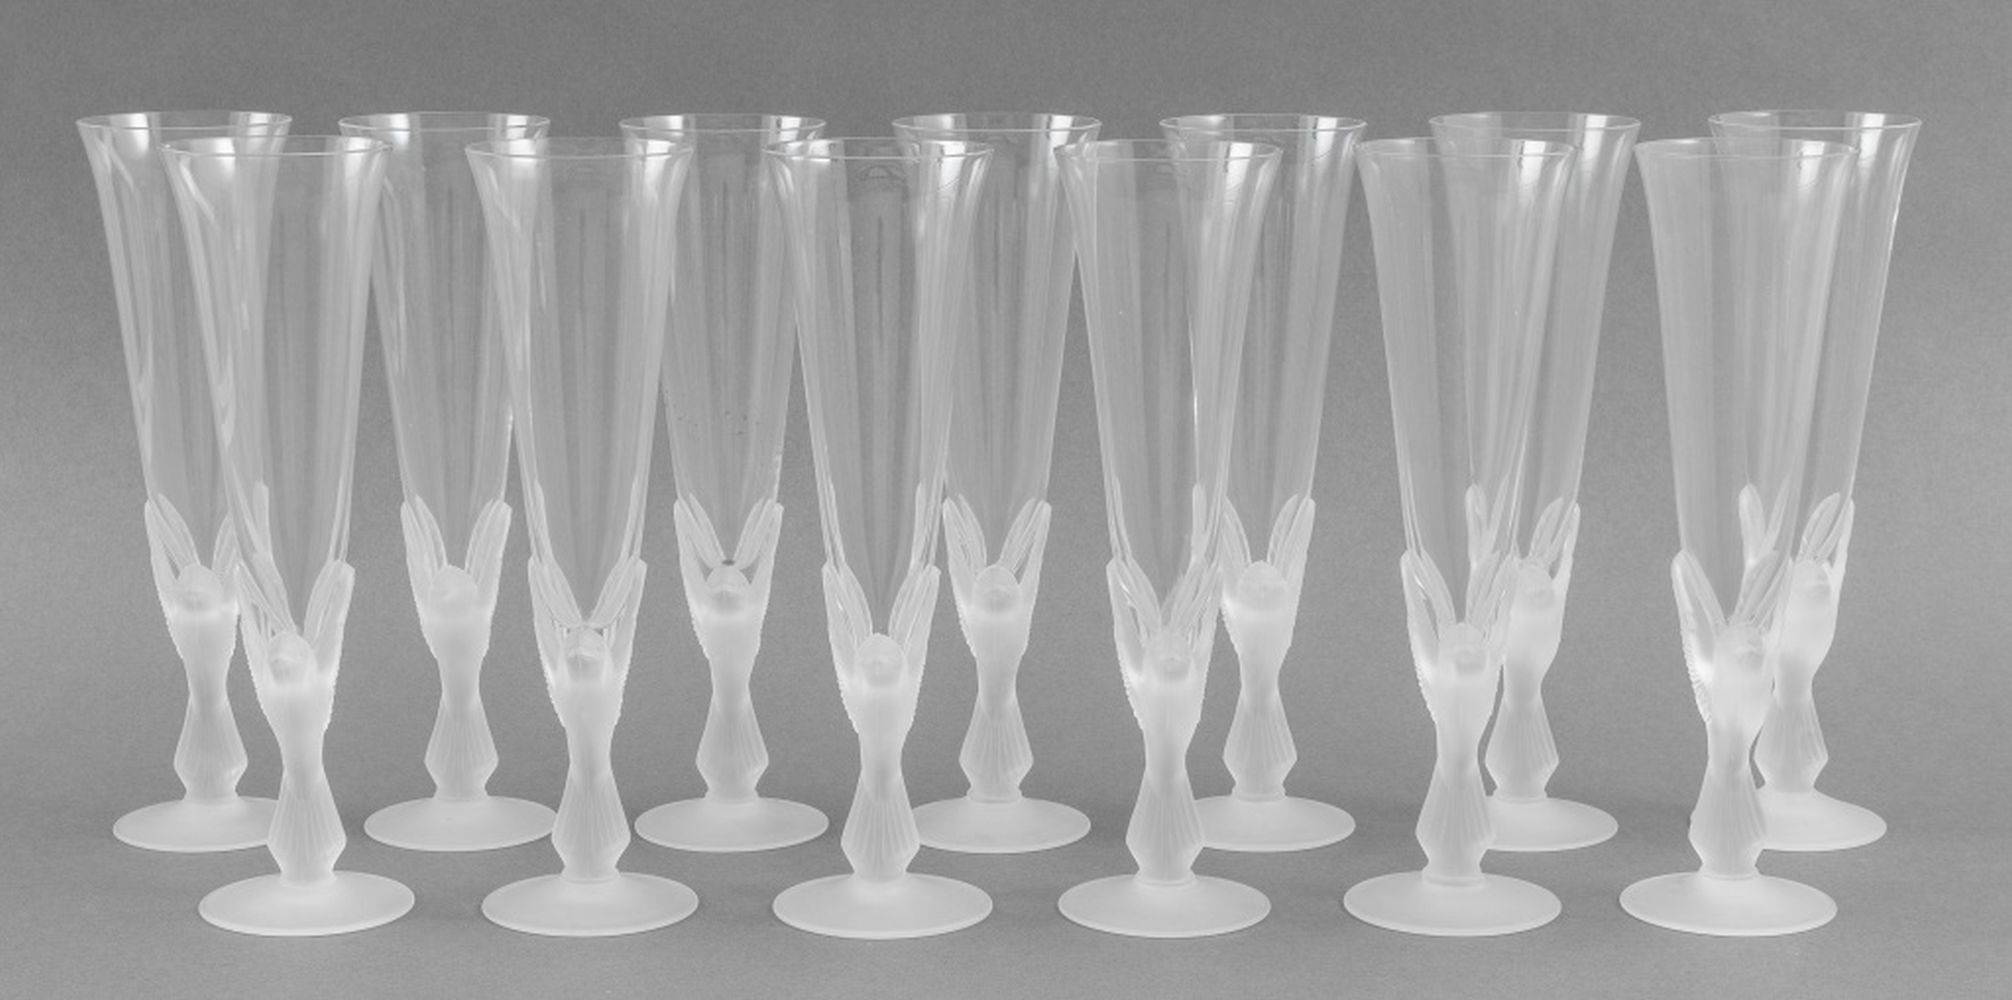 SASAKI WINGS FROSTED GLASS CHAMPAGNE 2bc32a